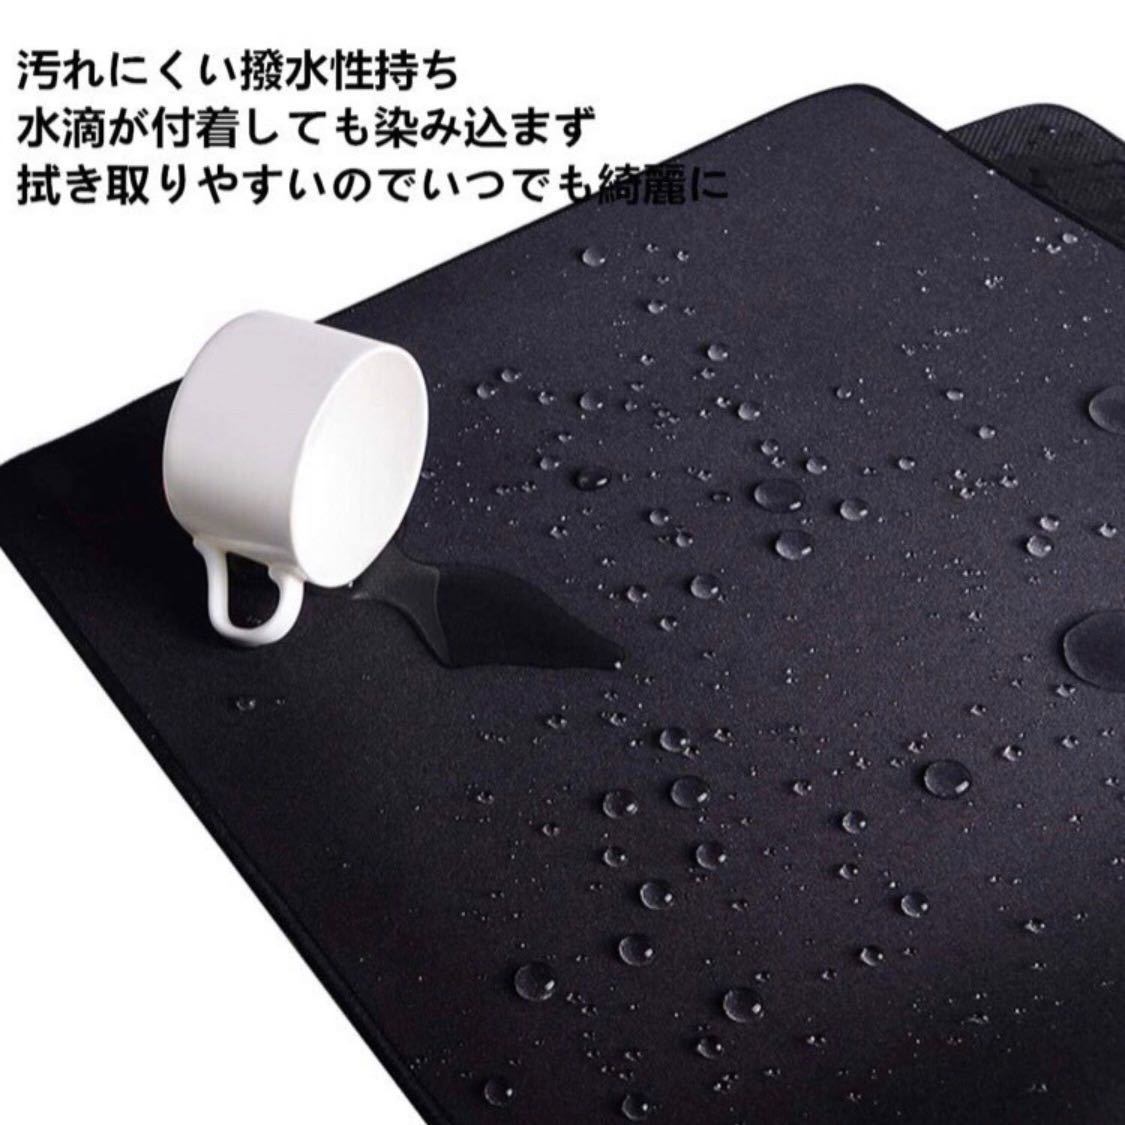 [ great popularity ] mouse pad optics type ge-ming Laser type ge-ming mouse pad water-repellent waterproof large super large high quality 